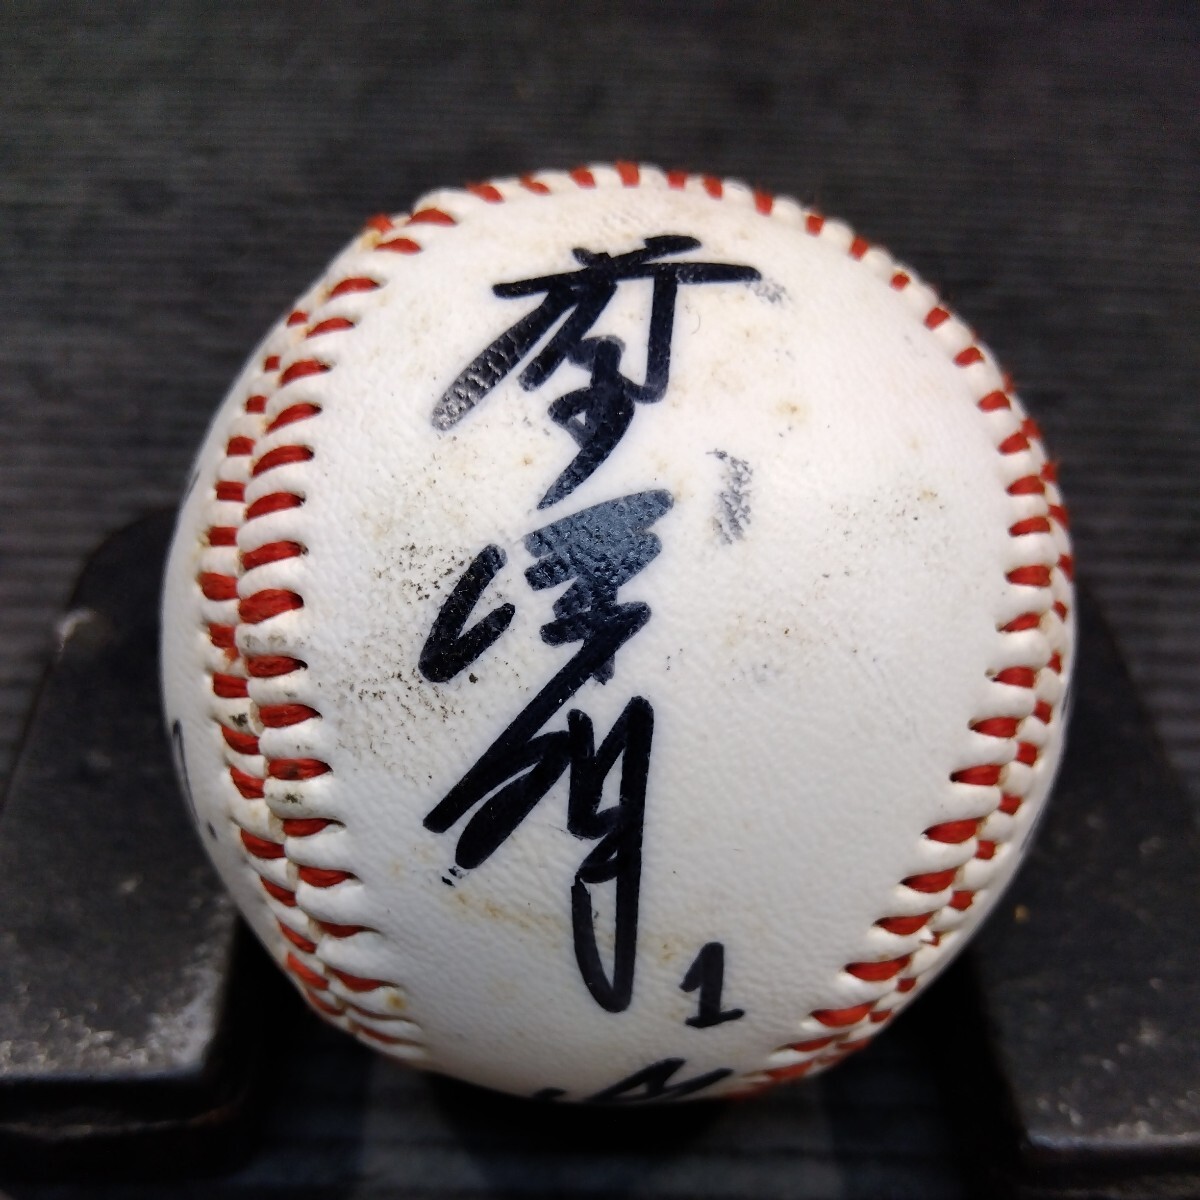 ⑯ Chunichi Dragons autograph autograph ball collection of autographs wistaria ... Komatsu . male ... one mountain inside one . cow island peace . not for sale Professional Baseball player Showa era active service that time thing 